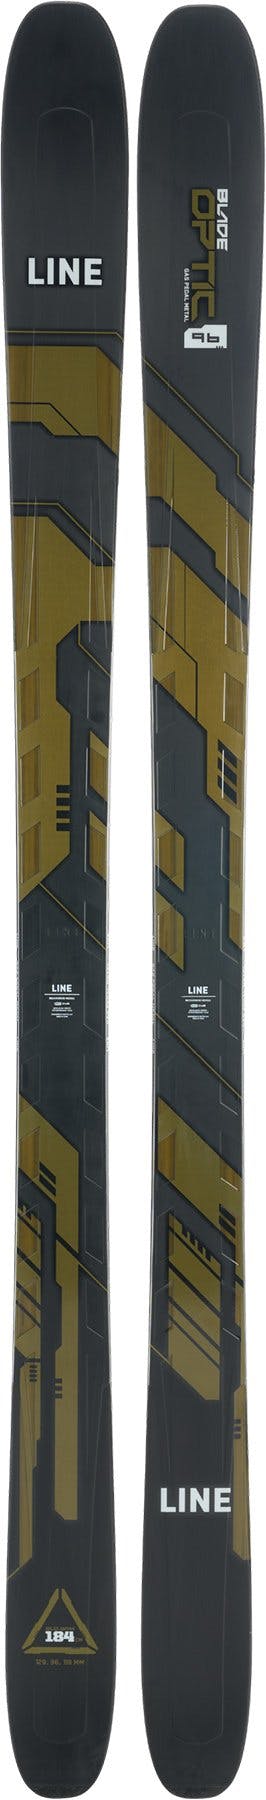 Product image for Blade Optic 96 Skis - Men's